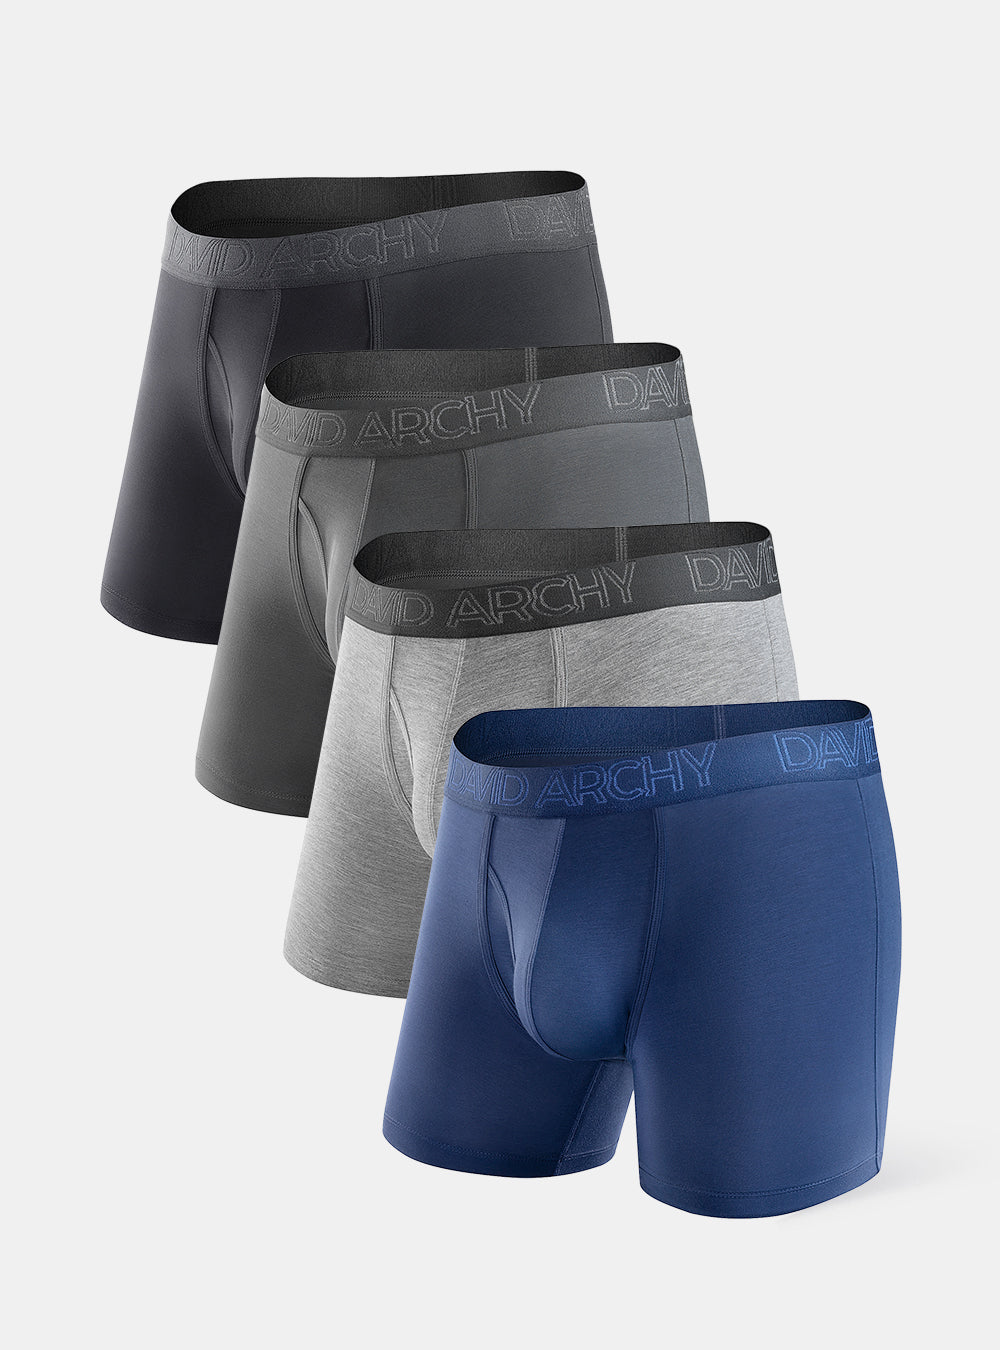 4 Packs Bamboo Rayon Breathable Soft Trunks